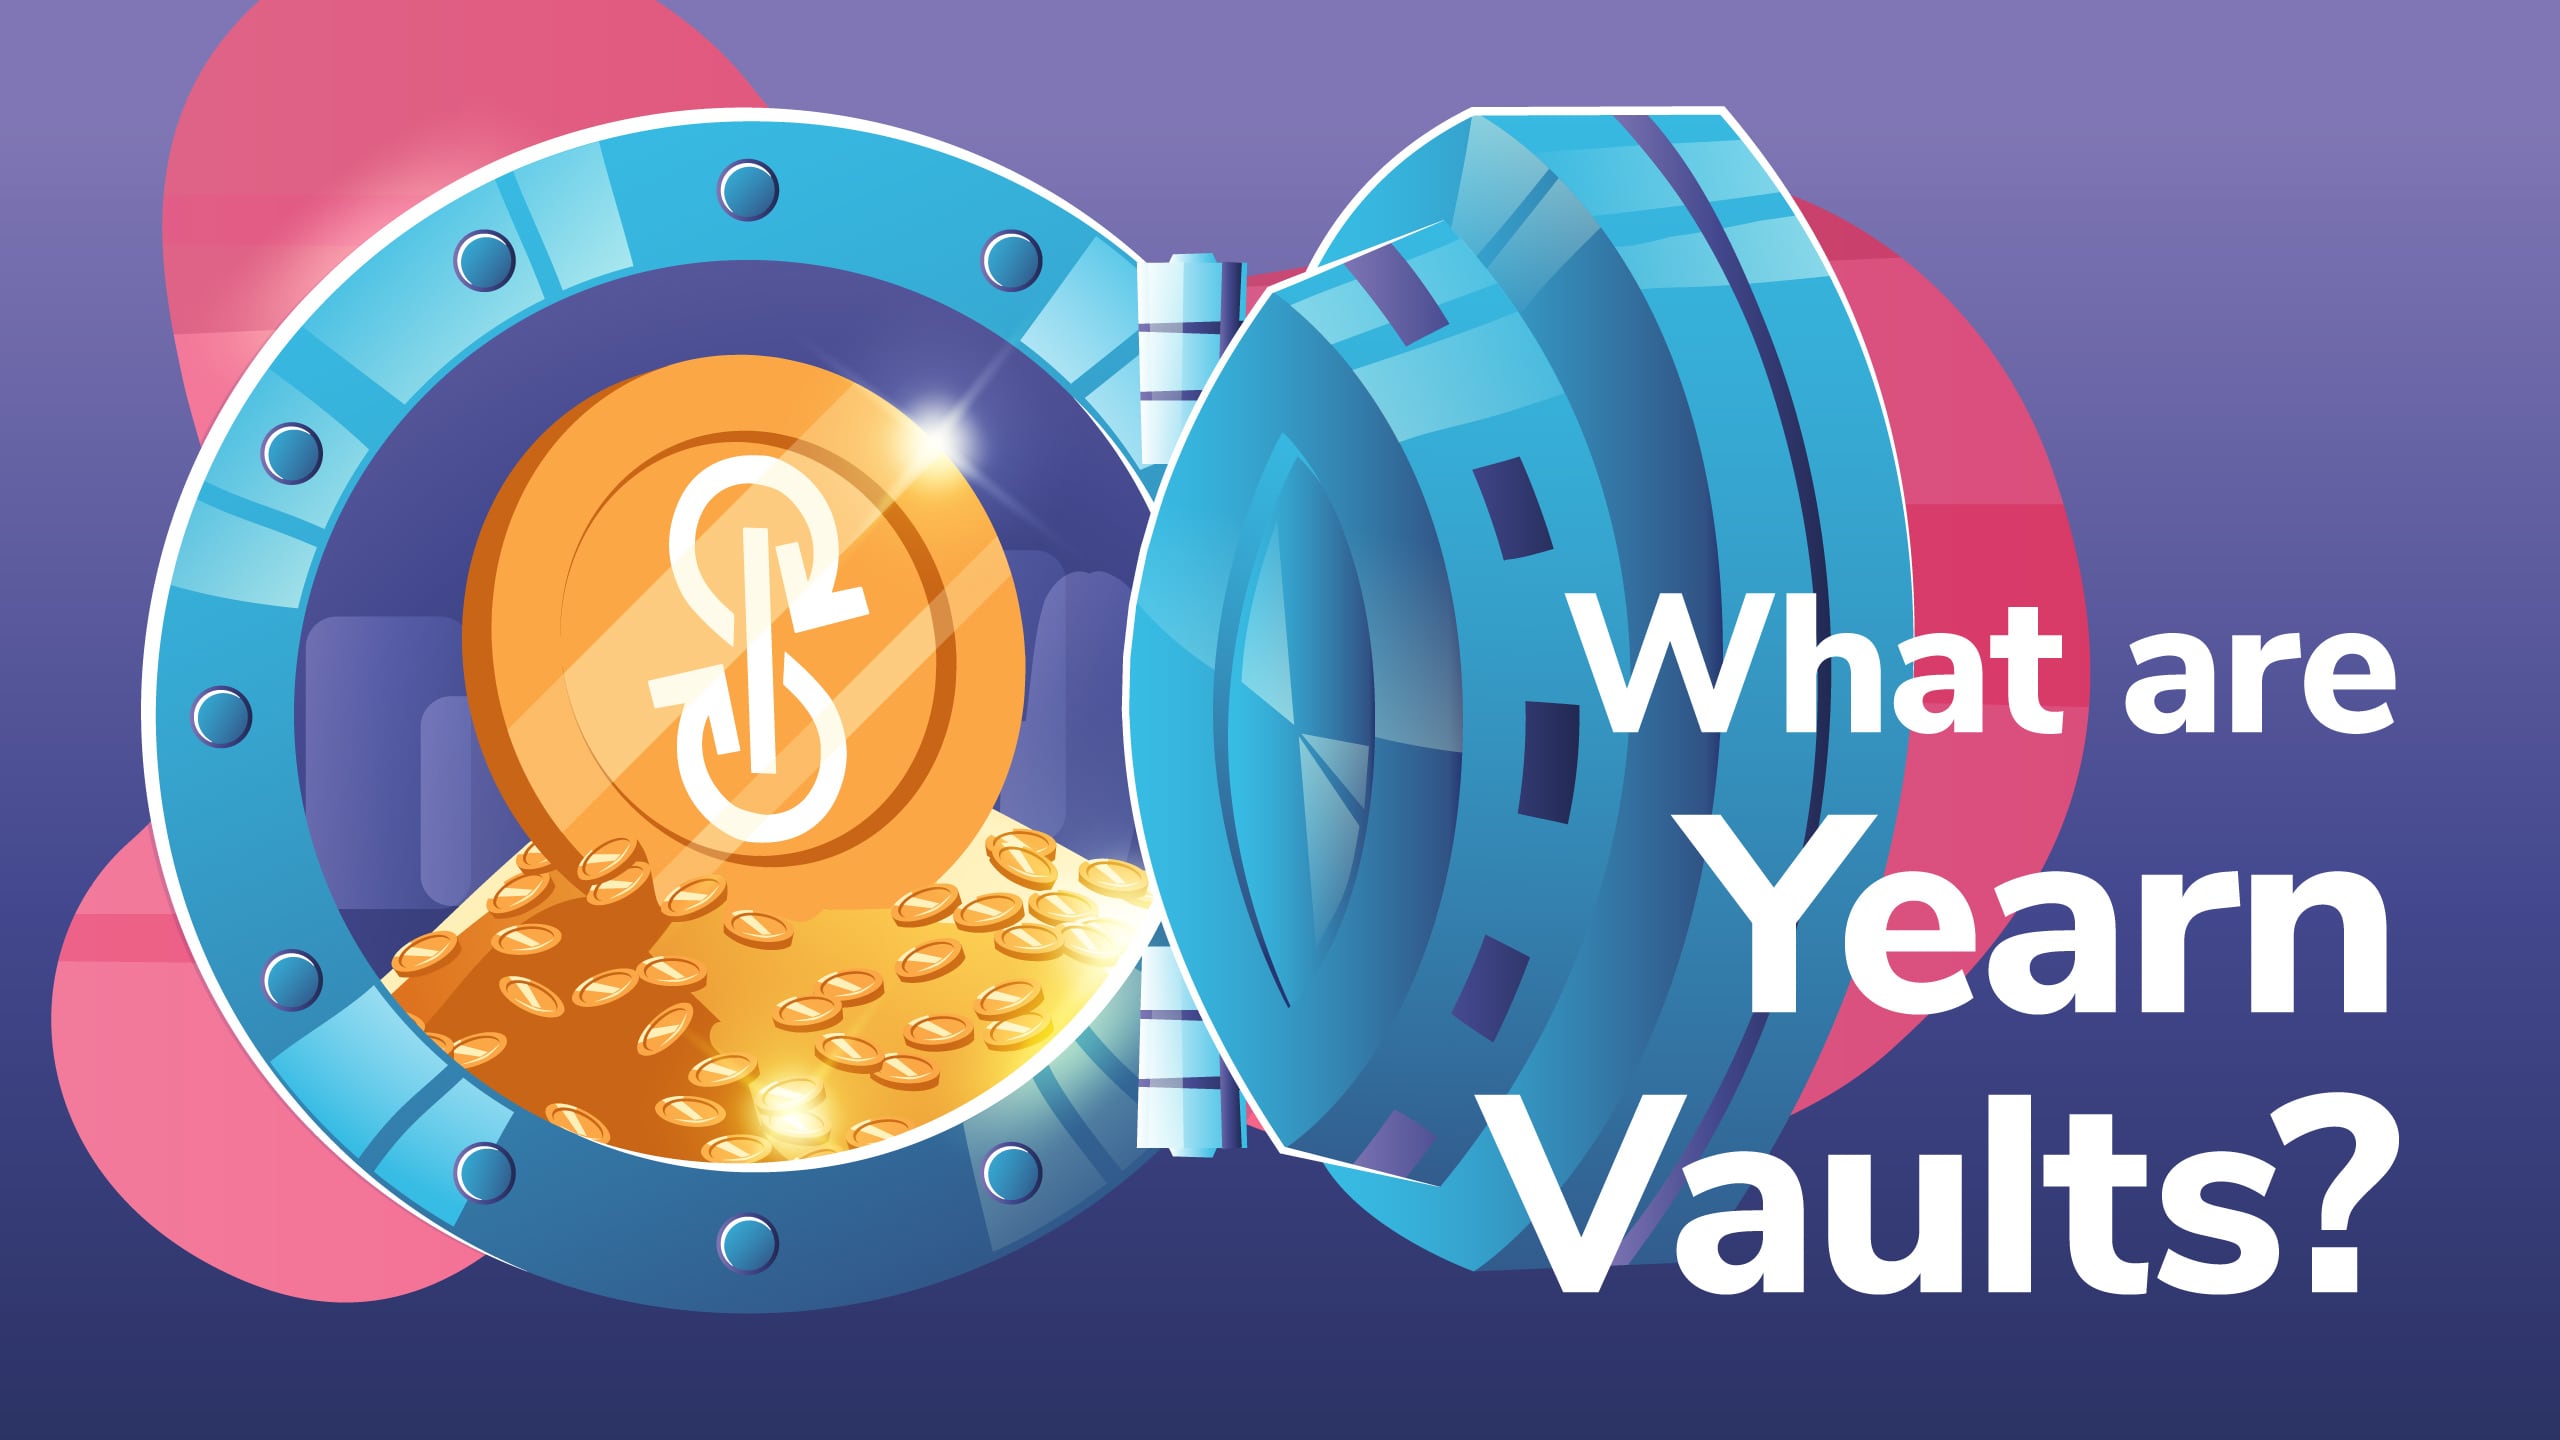 Yearn Finance explained: What are Vaults and Strategies?, by Marco Worms, Yearn